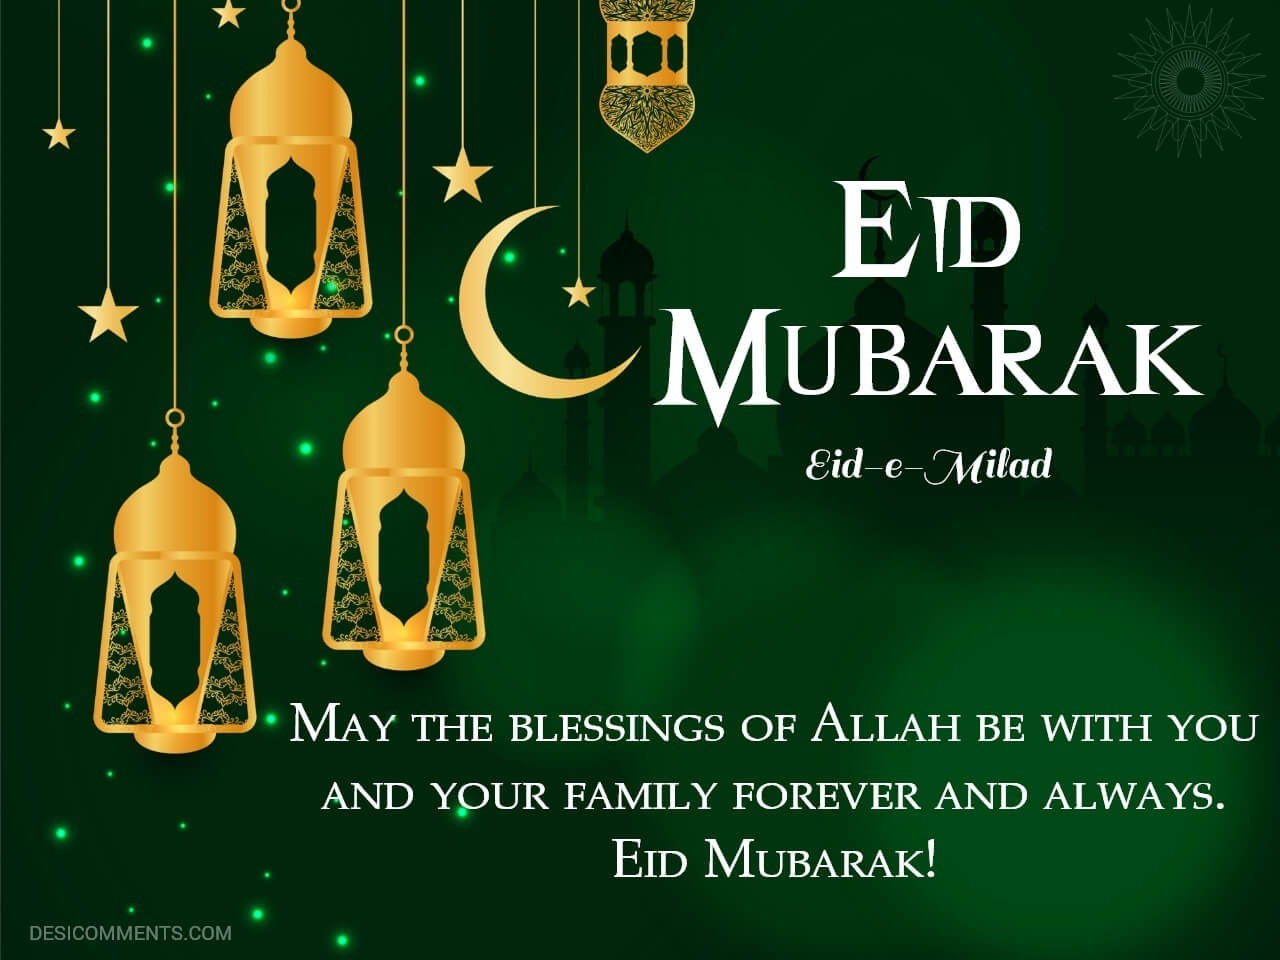 May The Blessings Of Allah Be With You - DesiComments.com